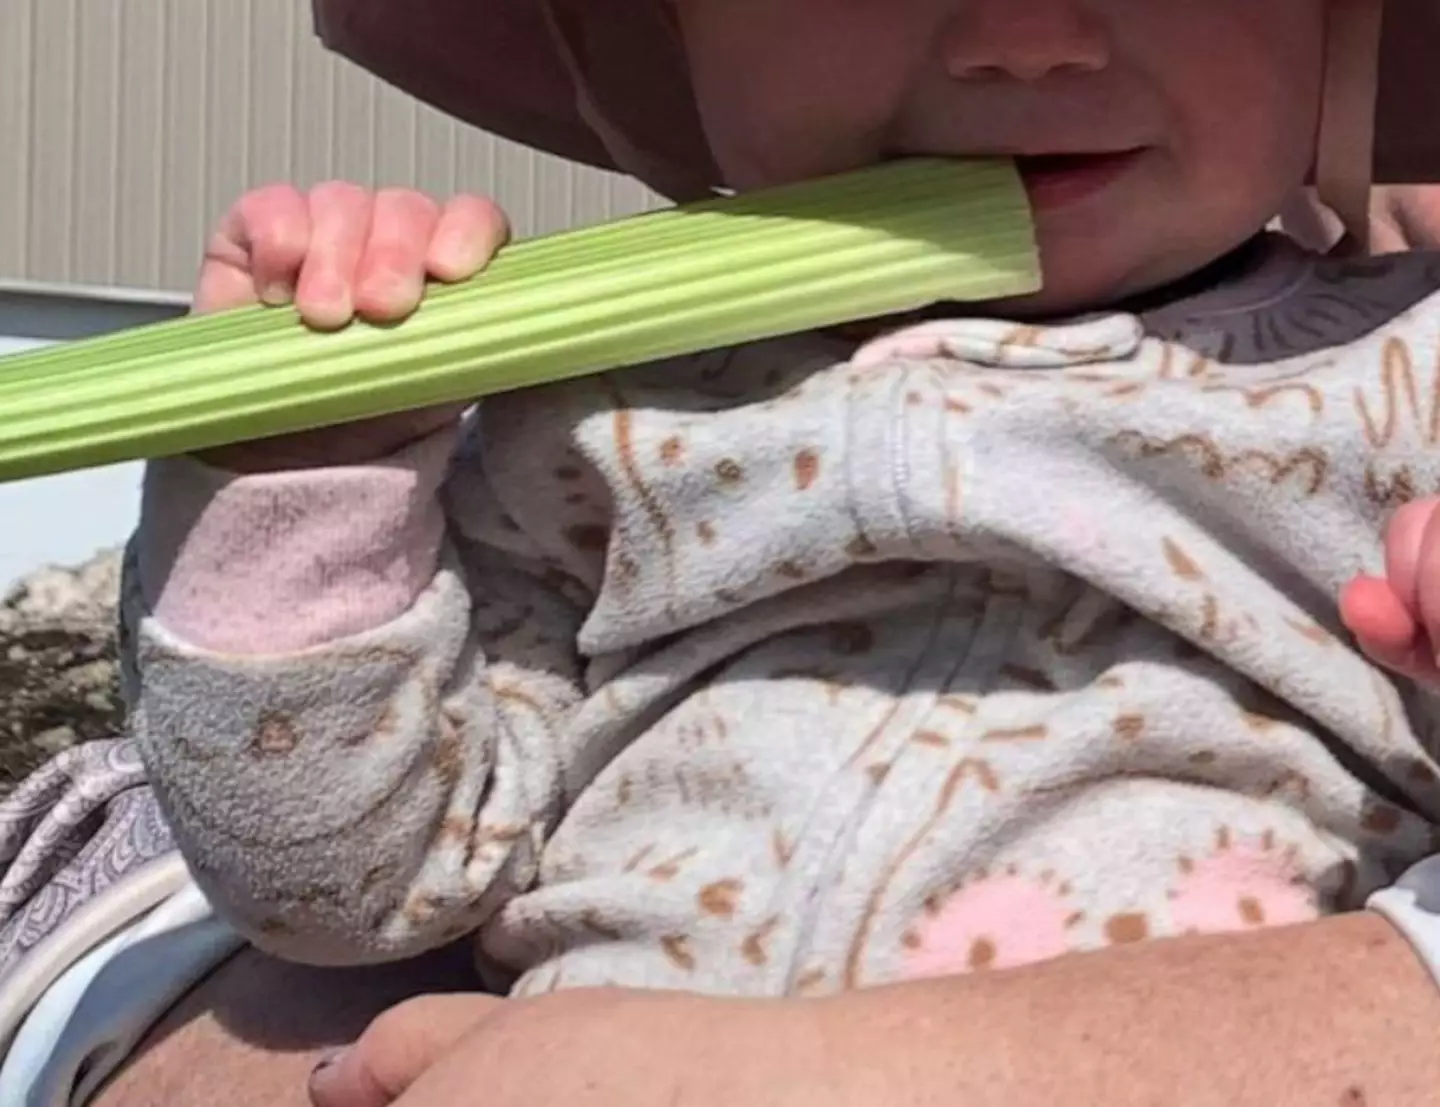 Mum issues warning after giving baby celery in sun.